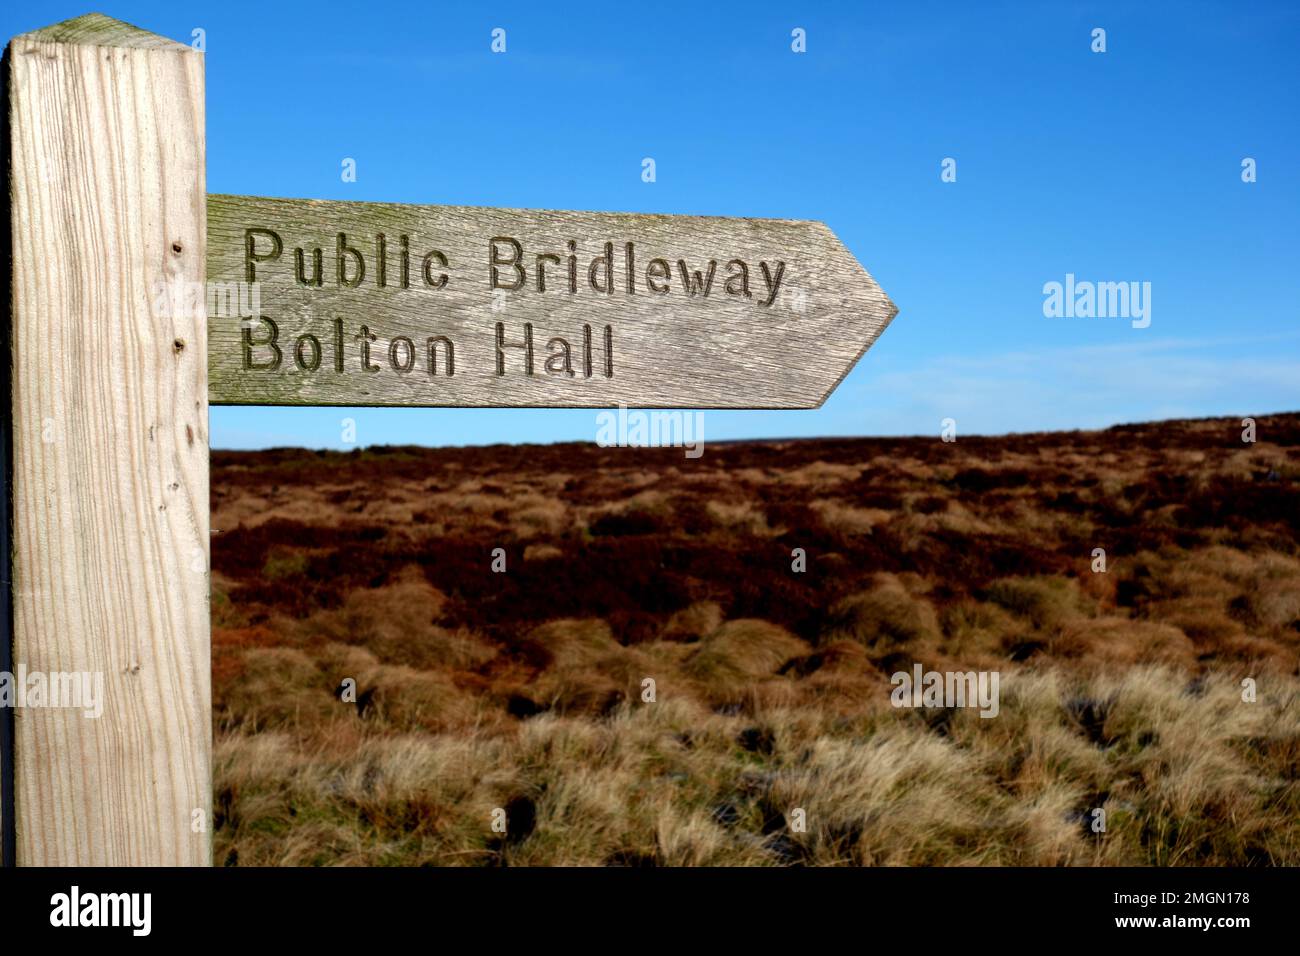 Wooden Signpost for Public Bridleway from Rlystone to Bolton Hall in the Yorkshire Dales National Park, England, UK. Stock Photo